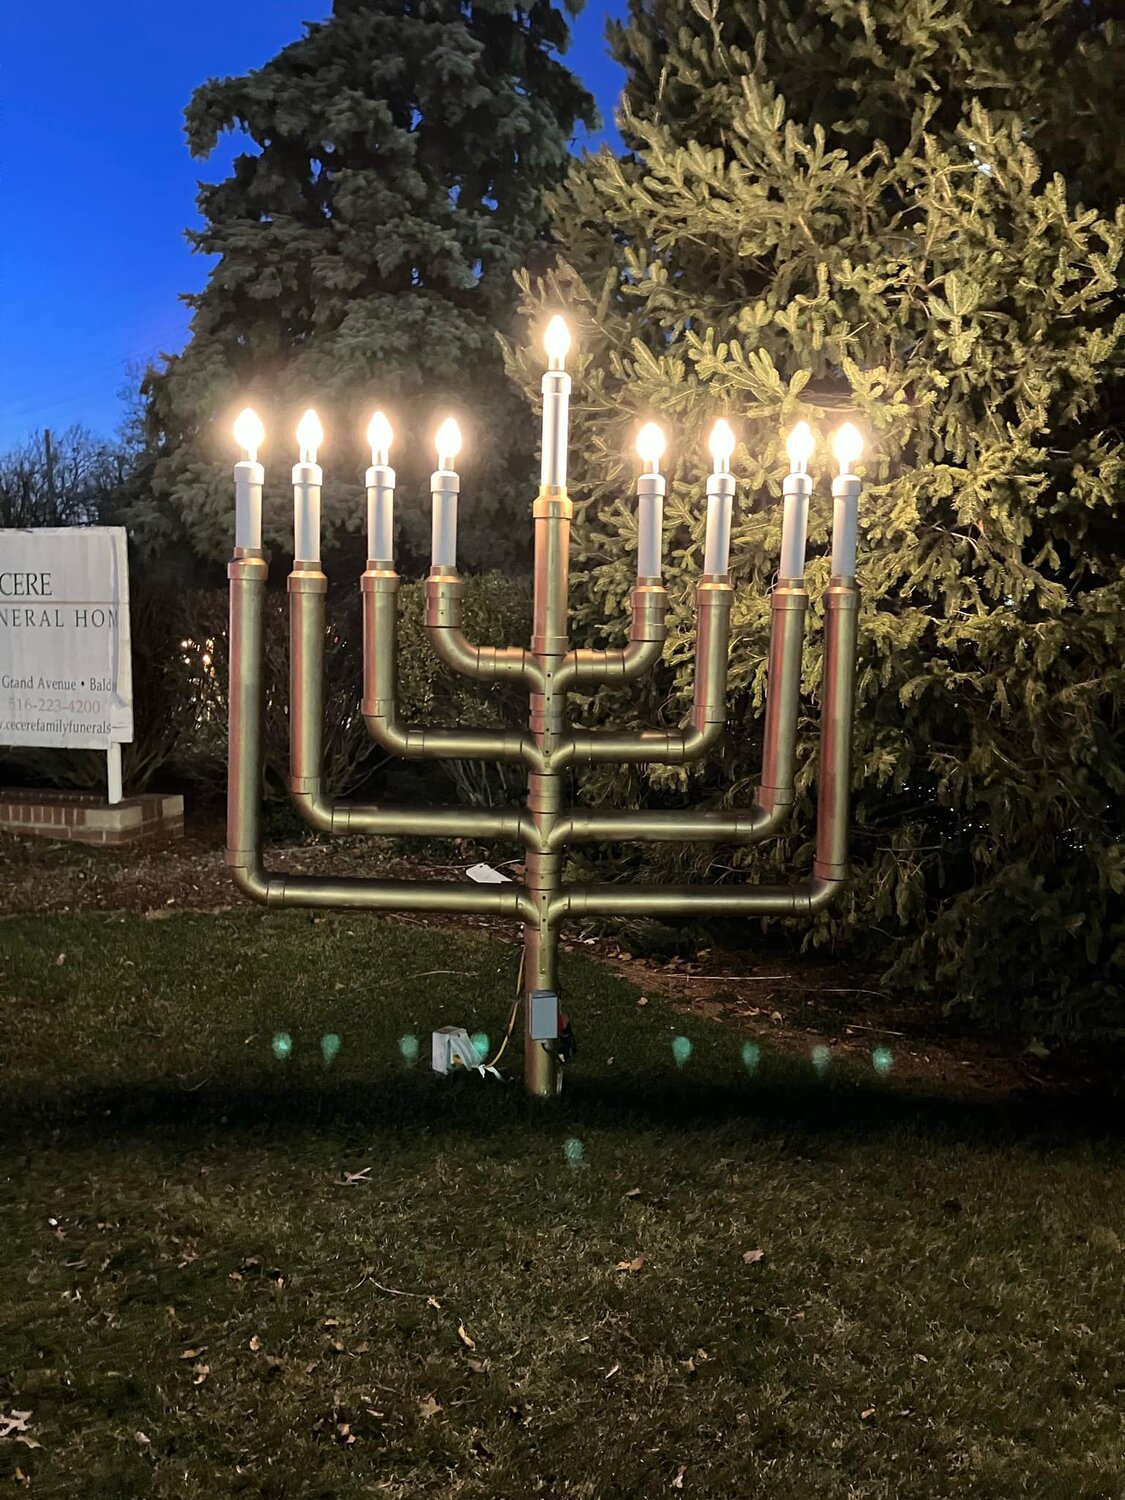 This year’s South Baldwin Jewish Center’s candle lighting will occur on Dec. 7 at 6:45 p.m. at the Baldwin Train Station.